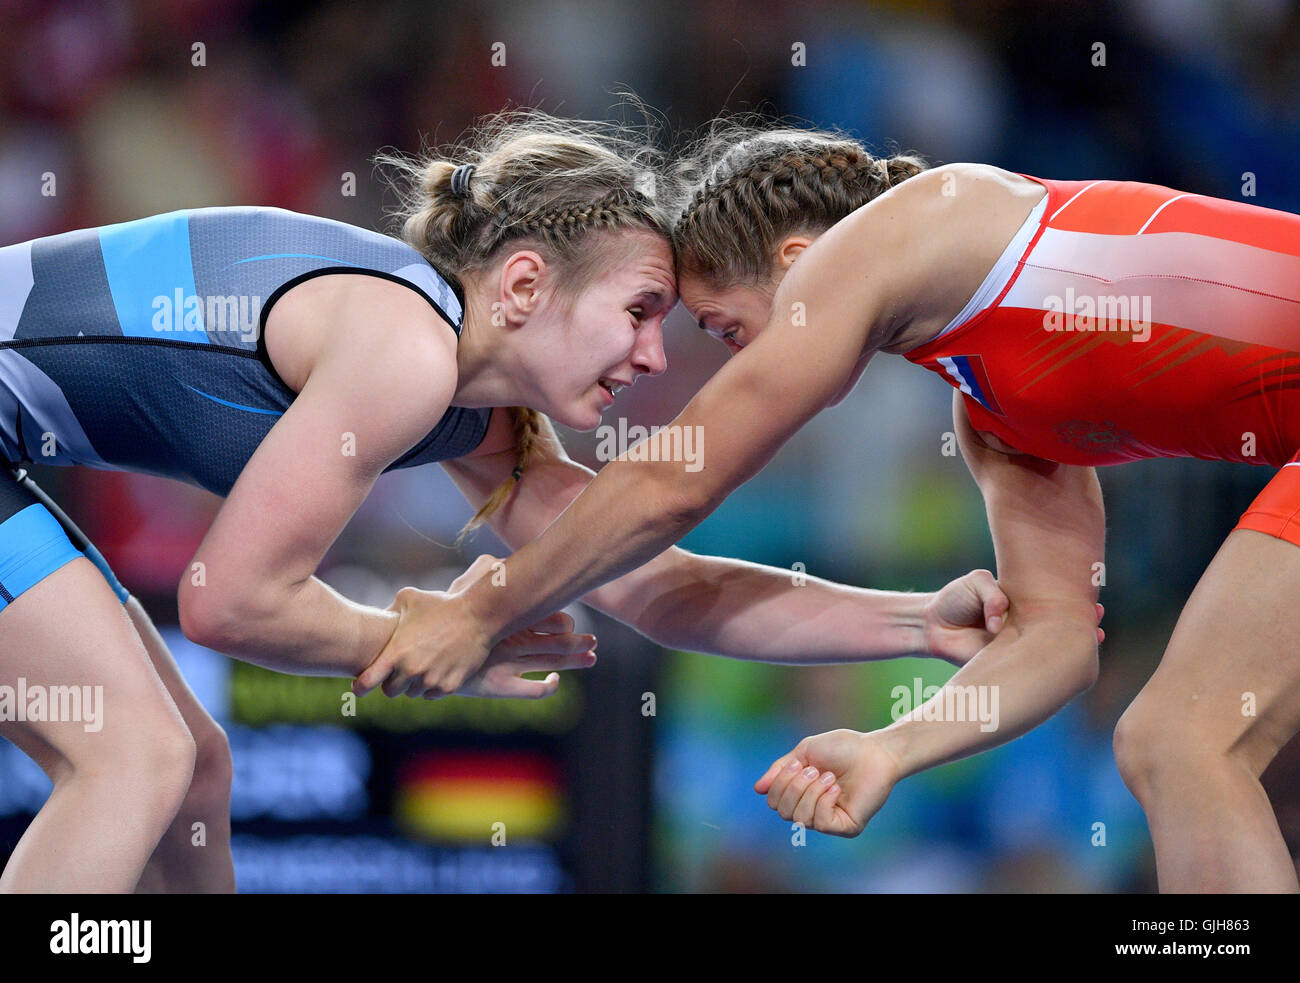 Rio de Janeiro, Brazil. 17th Aug, 2016. Valeriia Koblova Zholobova of  Russia (red) and Luisa Helga Gerda Niemeschof Germany in action during the  Women's Freestyle 58 kg Qualification of the Wrestling events